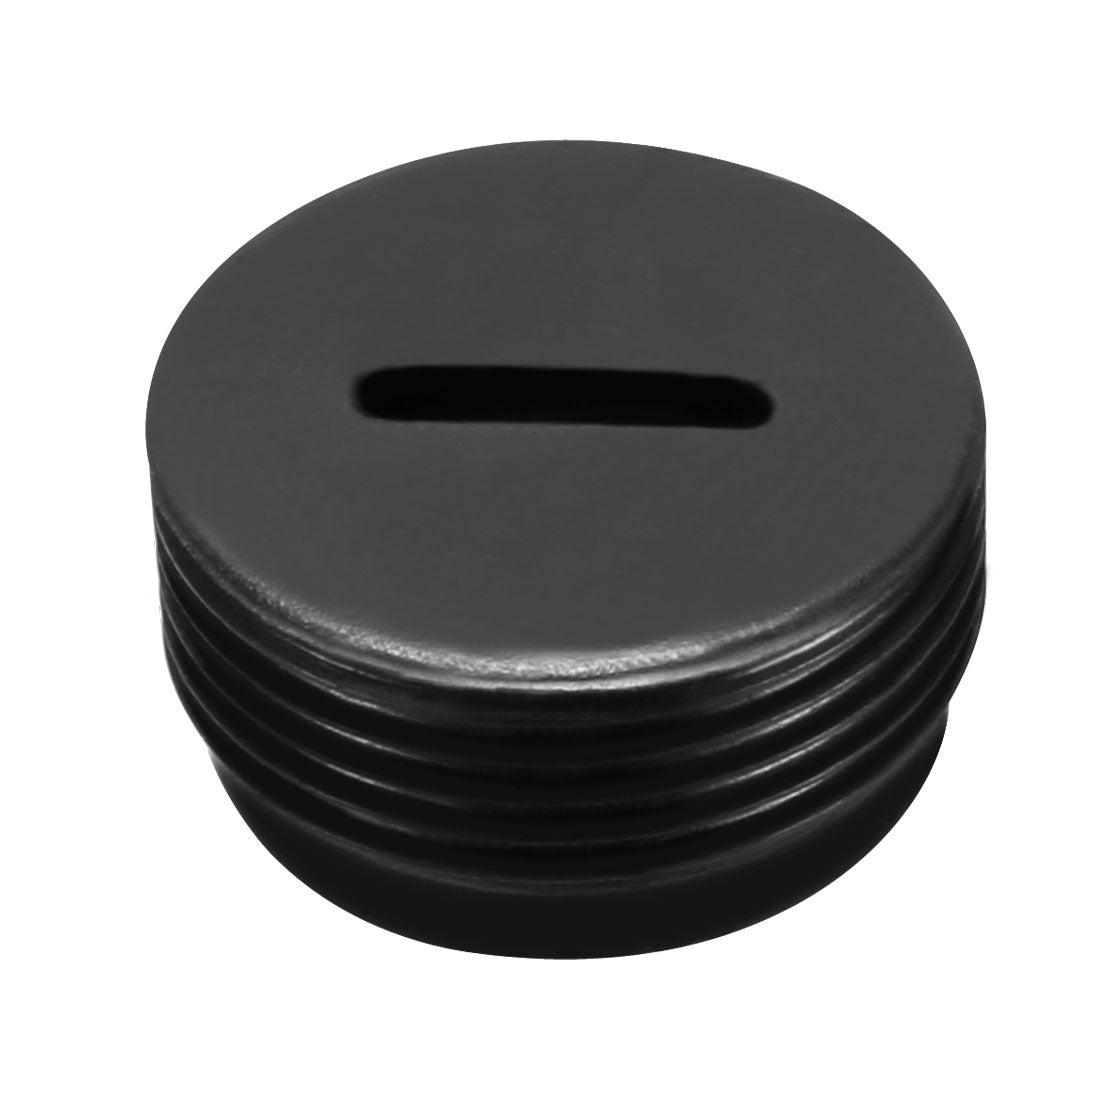 uxcell Uxcell Carbon Brush Holder Caps 16mm O.D. 8mm Thickness Motor Brush Cover Plastic Fitting Thread Black 2pcs